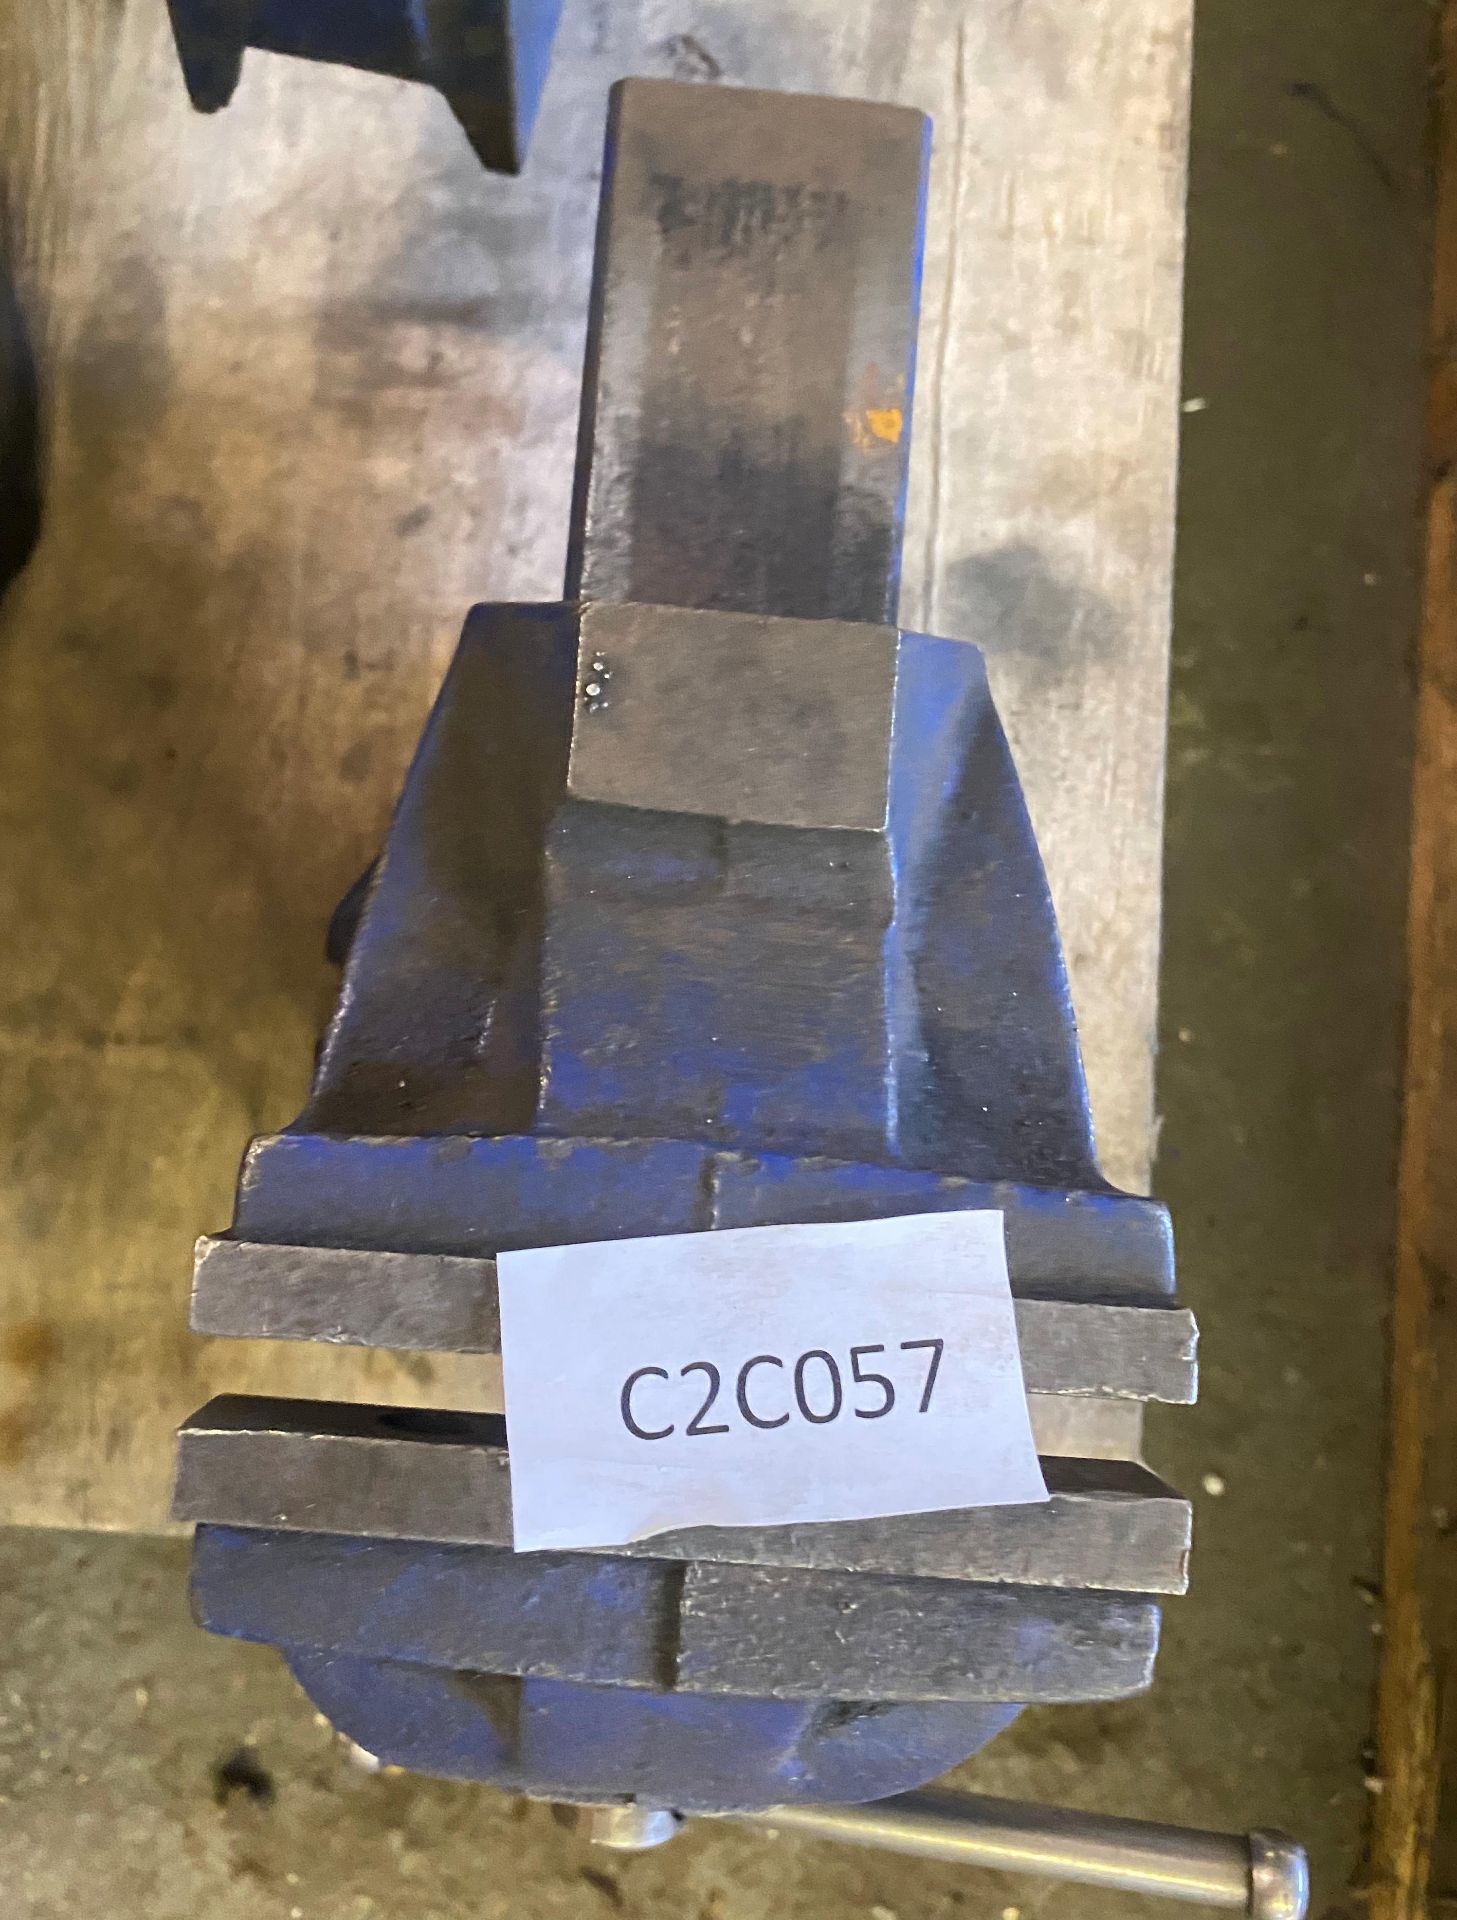 1 x Heavy Duty Bench Vice - Ref: C2C057 - CL789 - Location: SolihullCollection Details:Location: